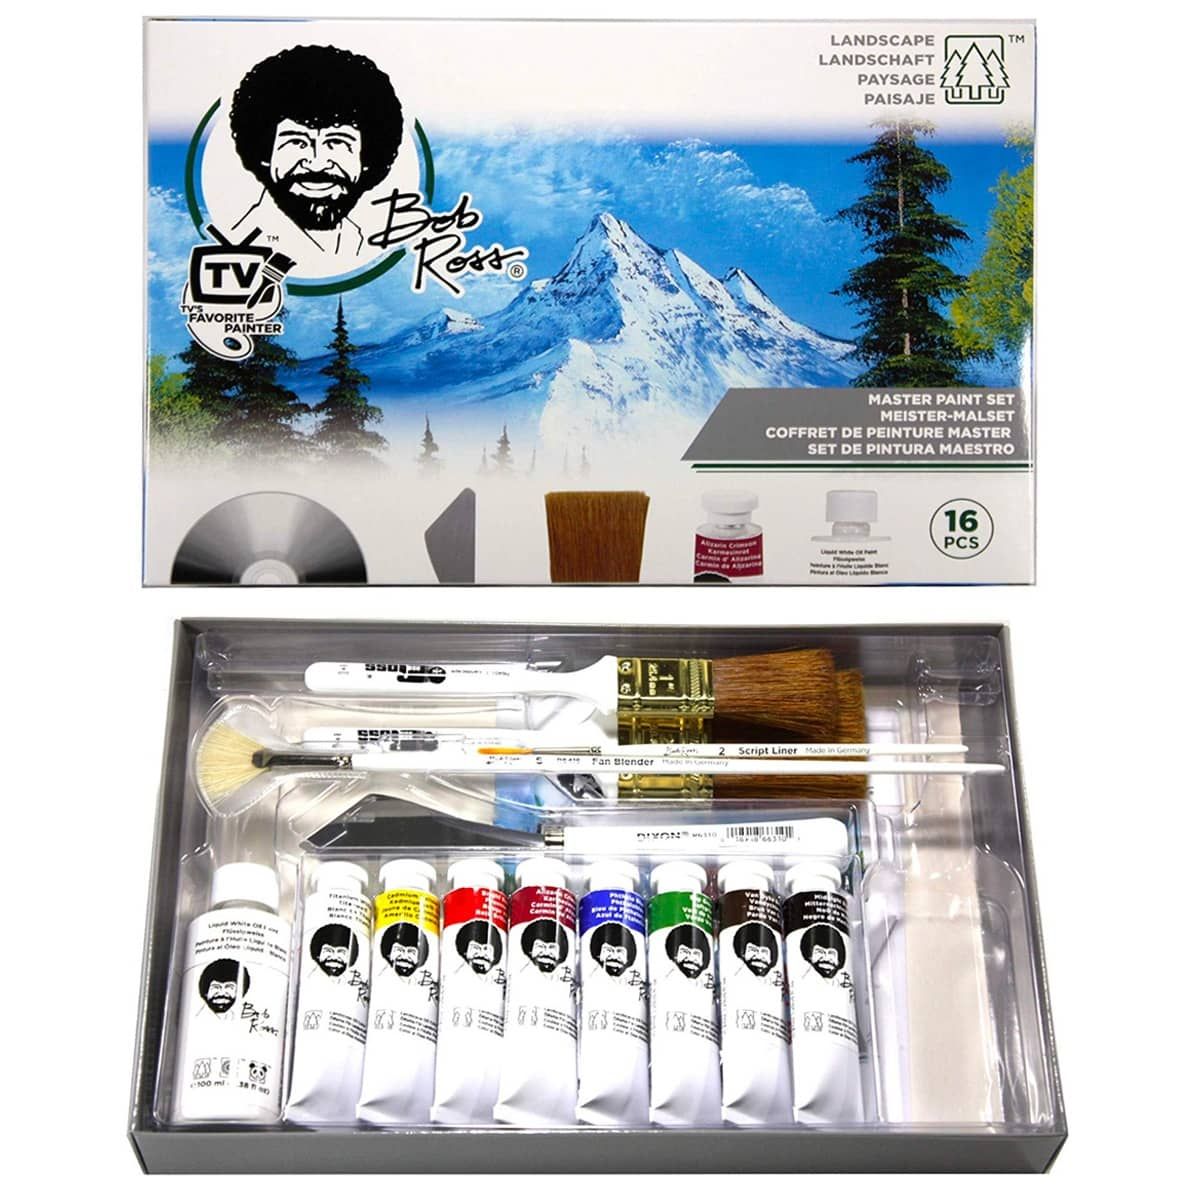 Oil Painting Master Set with DVD